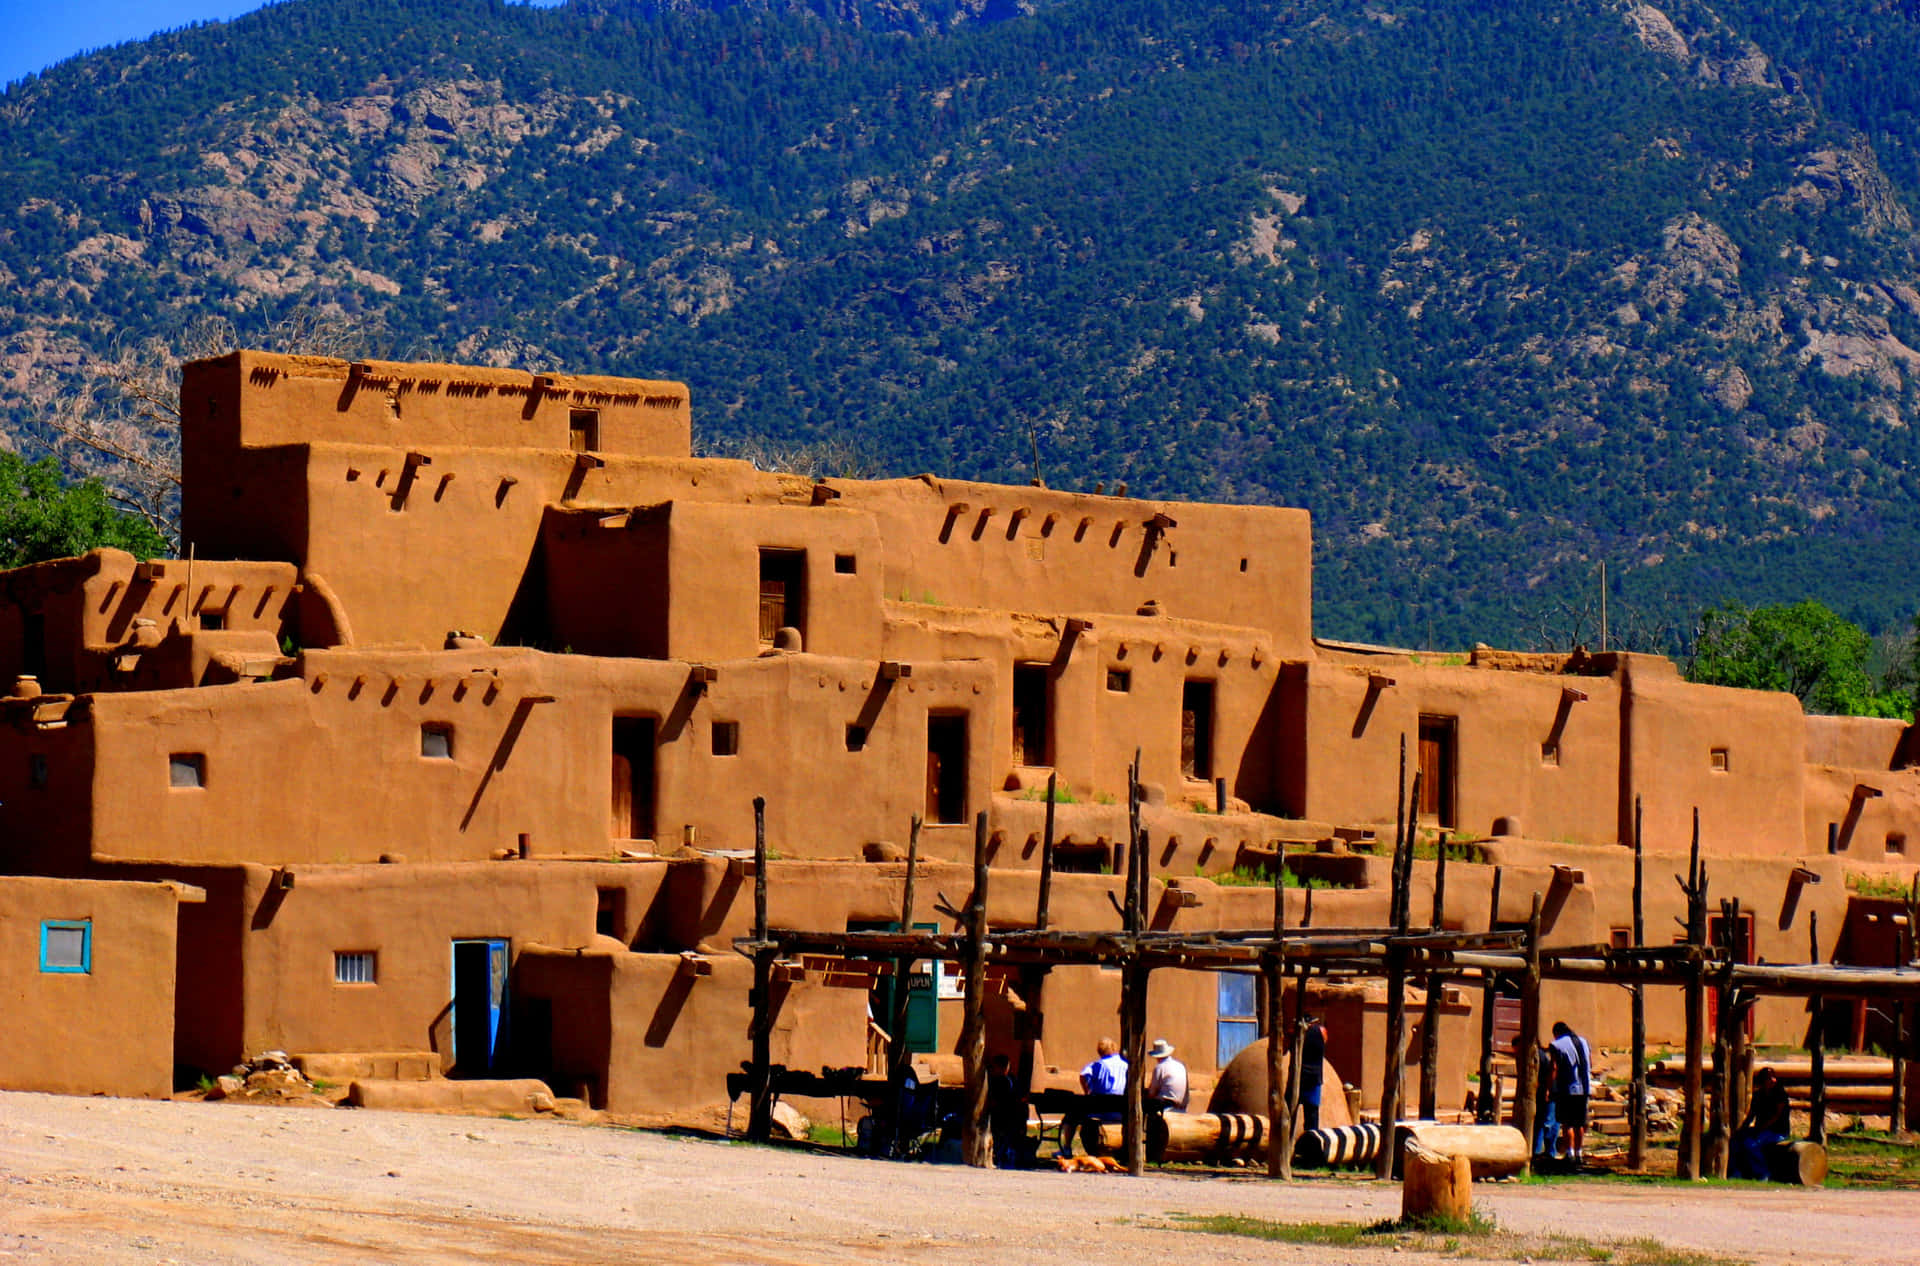 Caption: "Magnificent midday at the Historic Taos Pueblo" Wallpaper